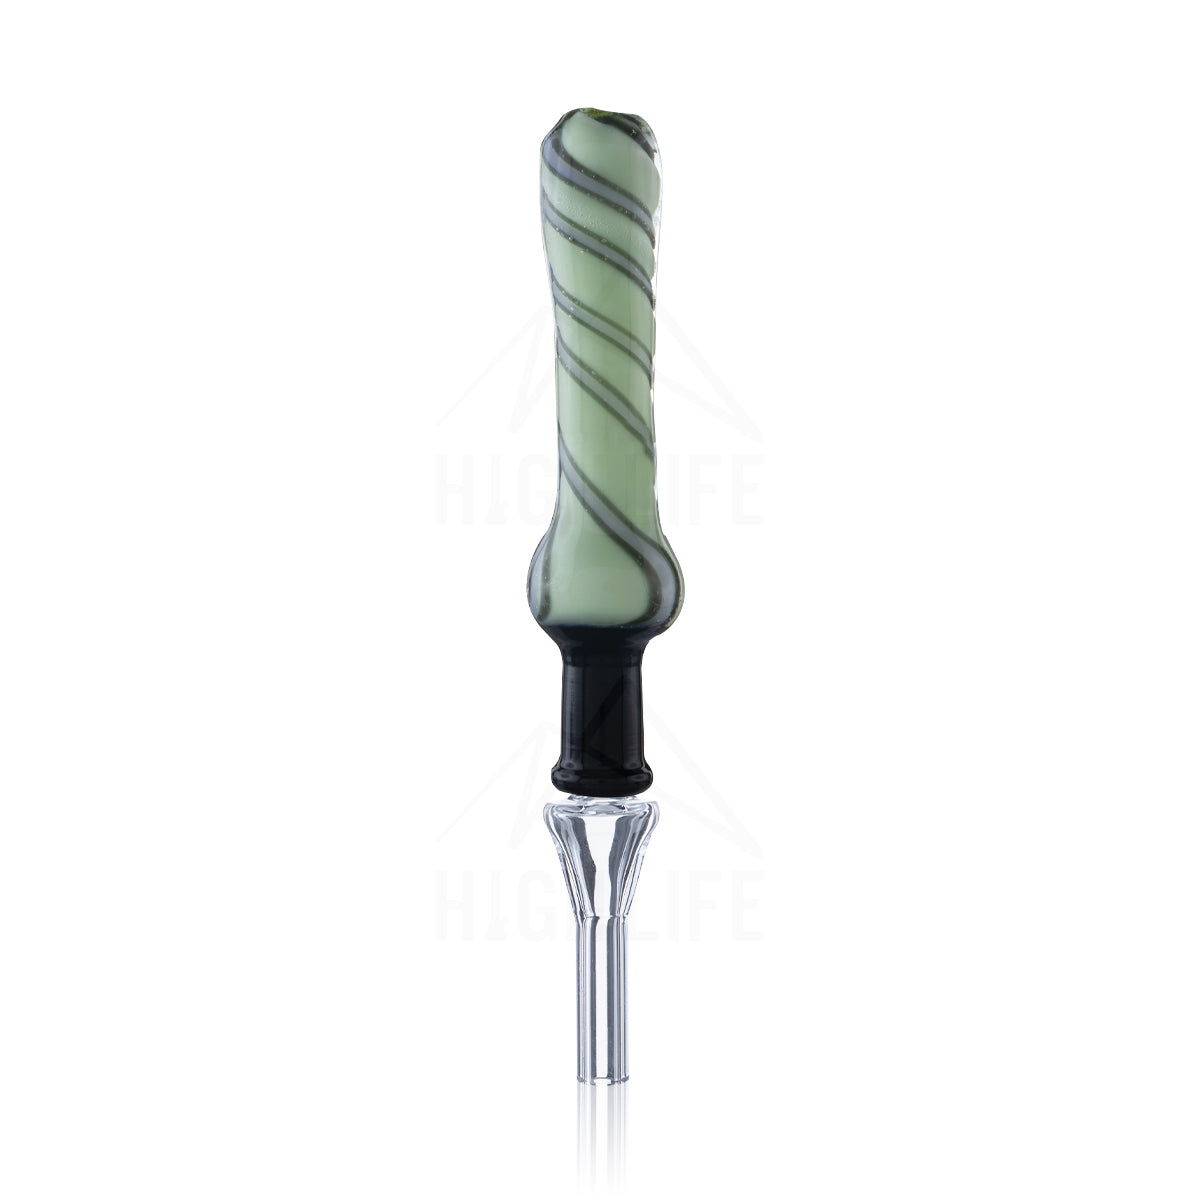 Nectar Collector w/ Quartz Tip | 10mm - Jade Candy Cane Mix - rigs for weed